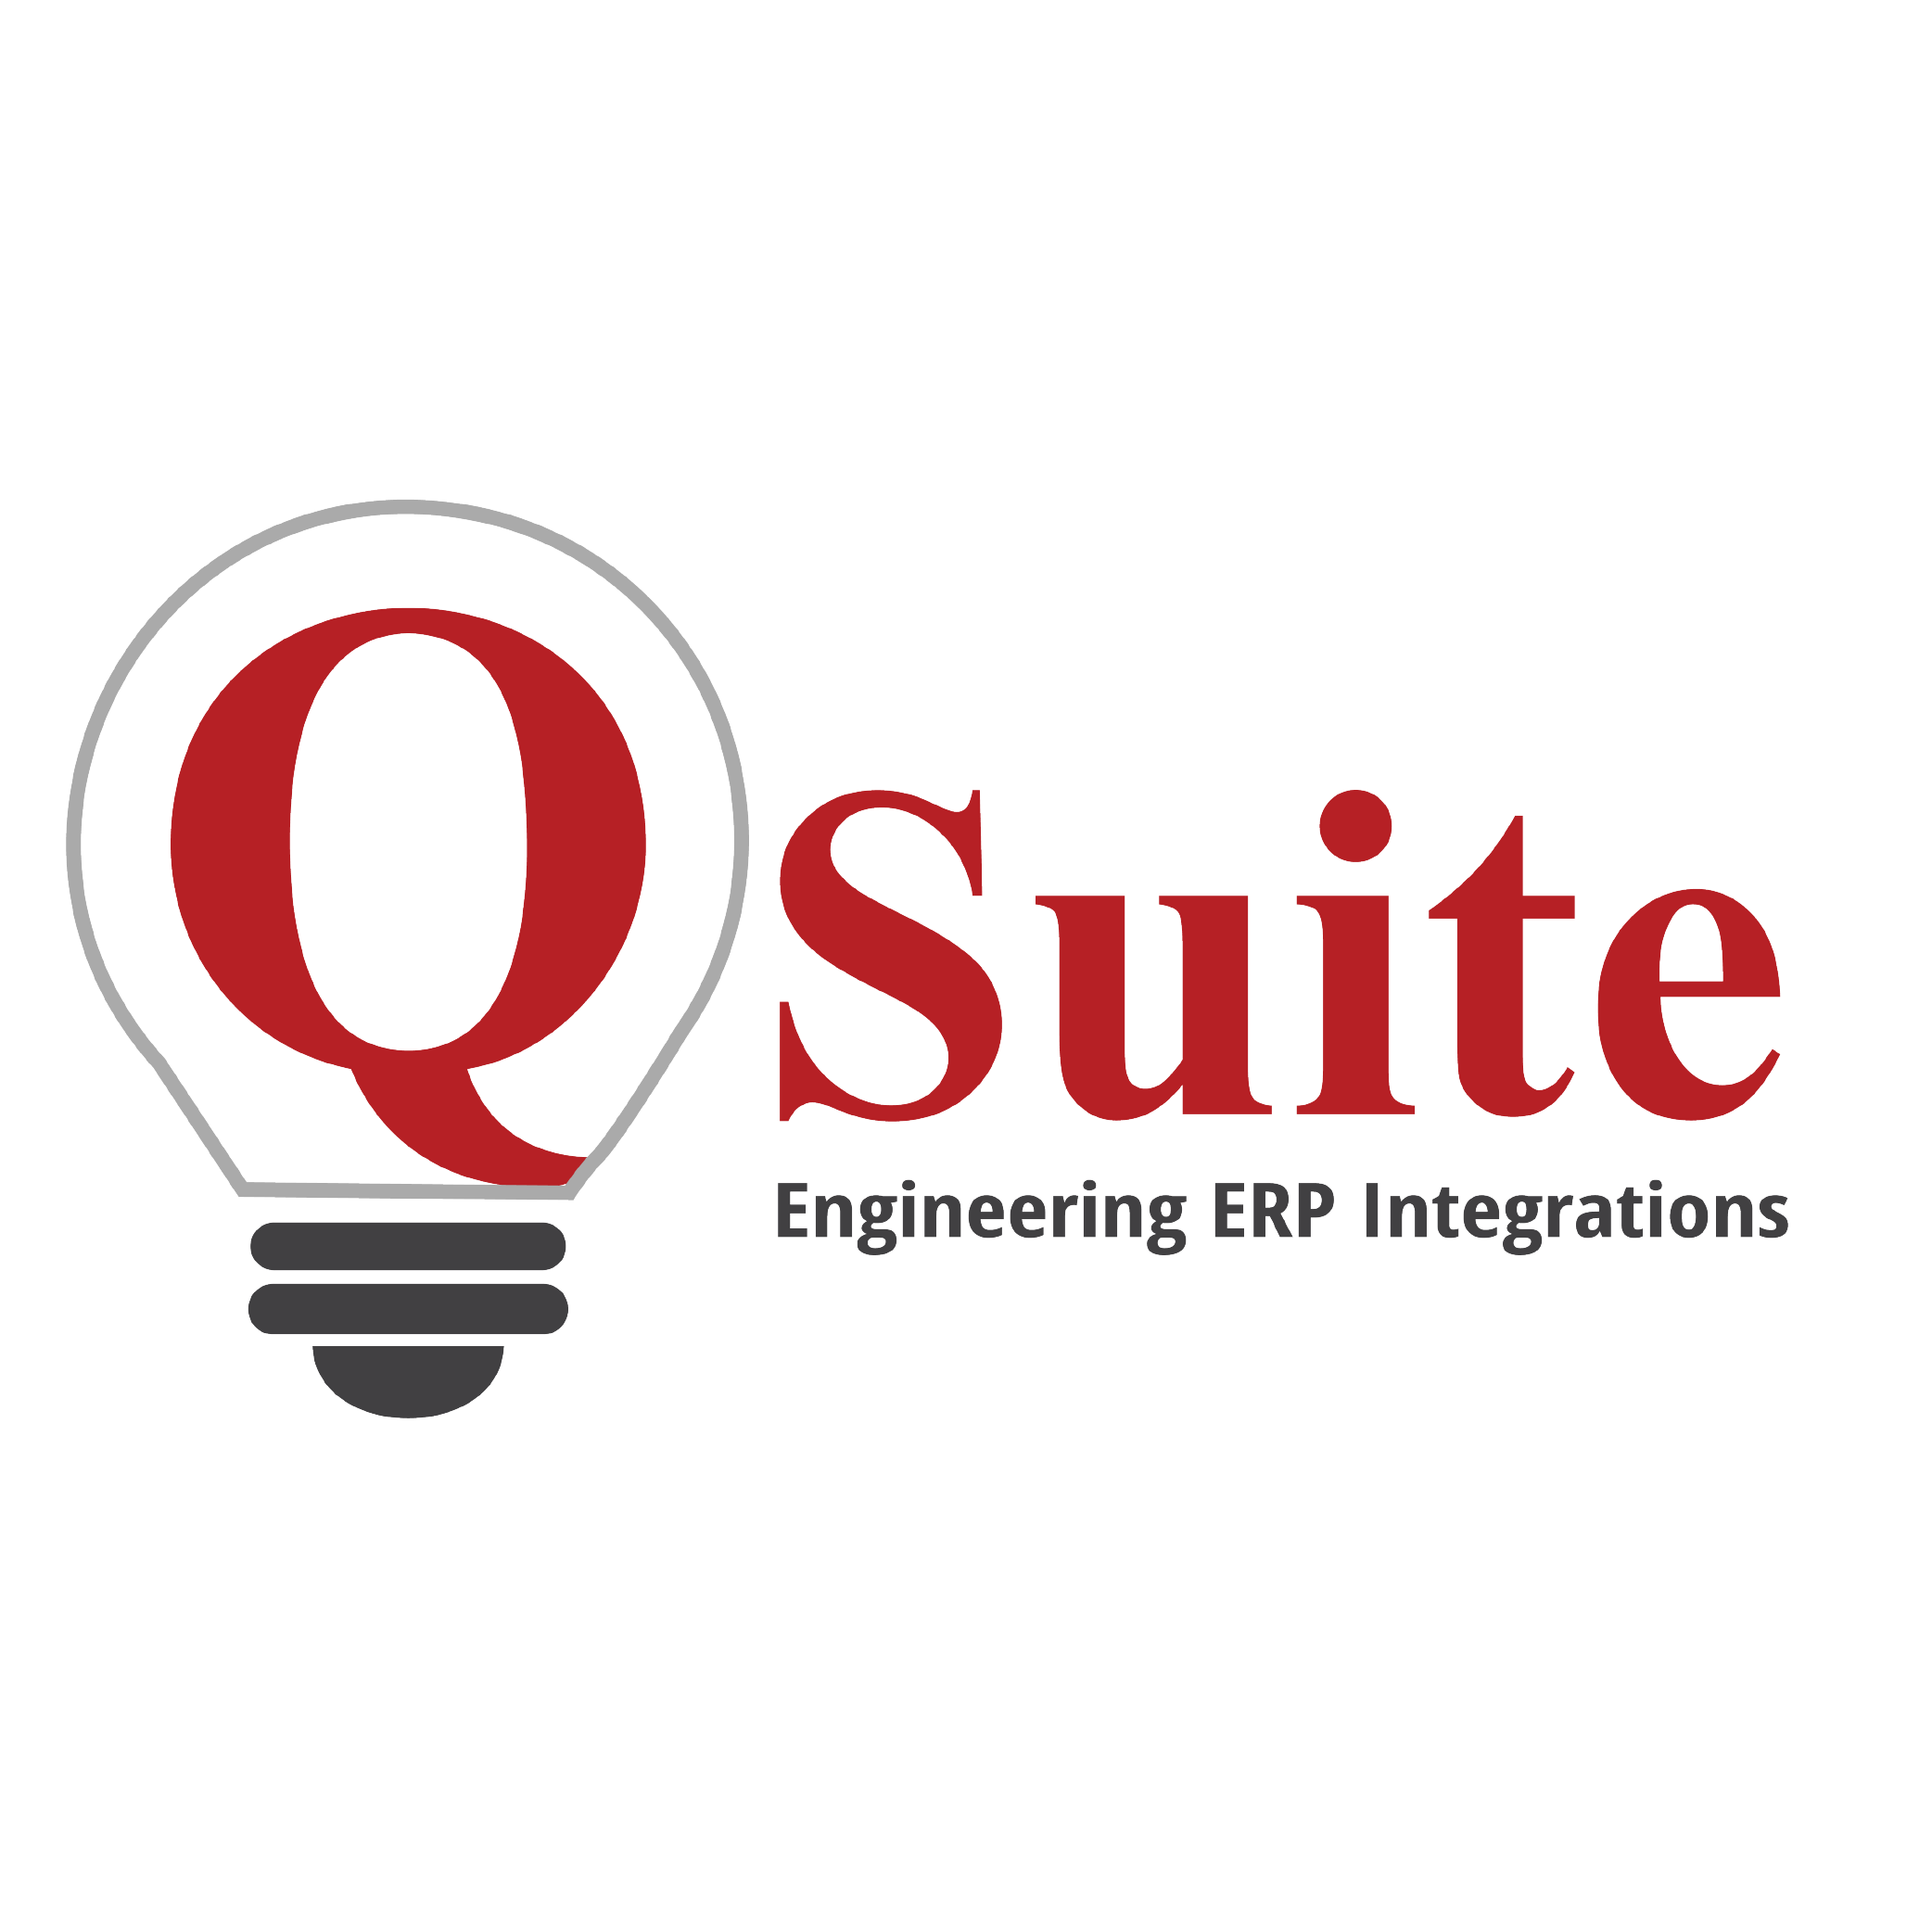 QSuite: Let's talk and figure out the right solution for your business